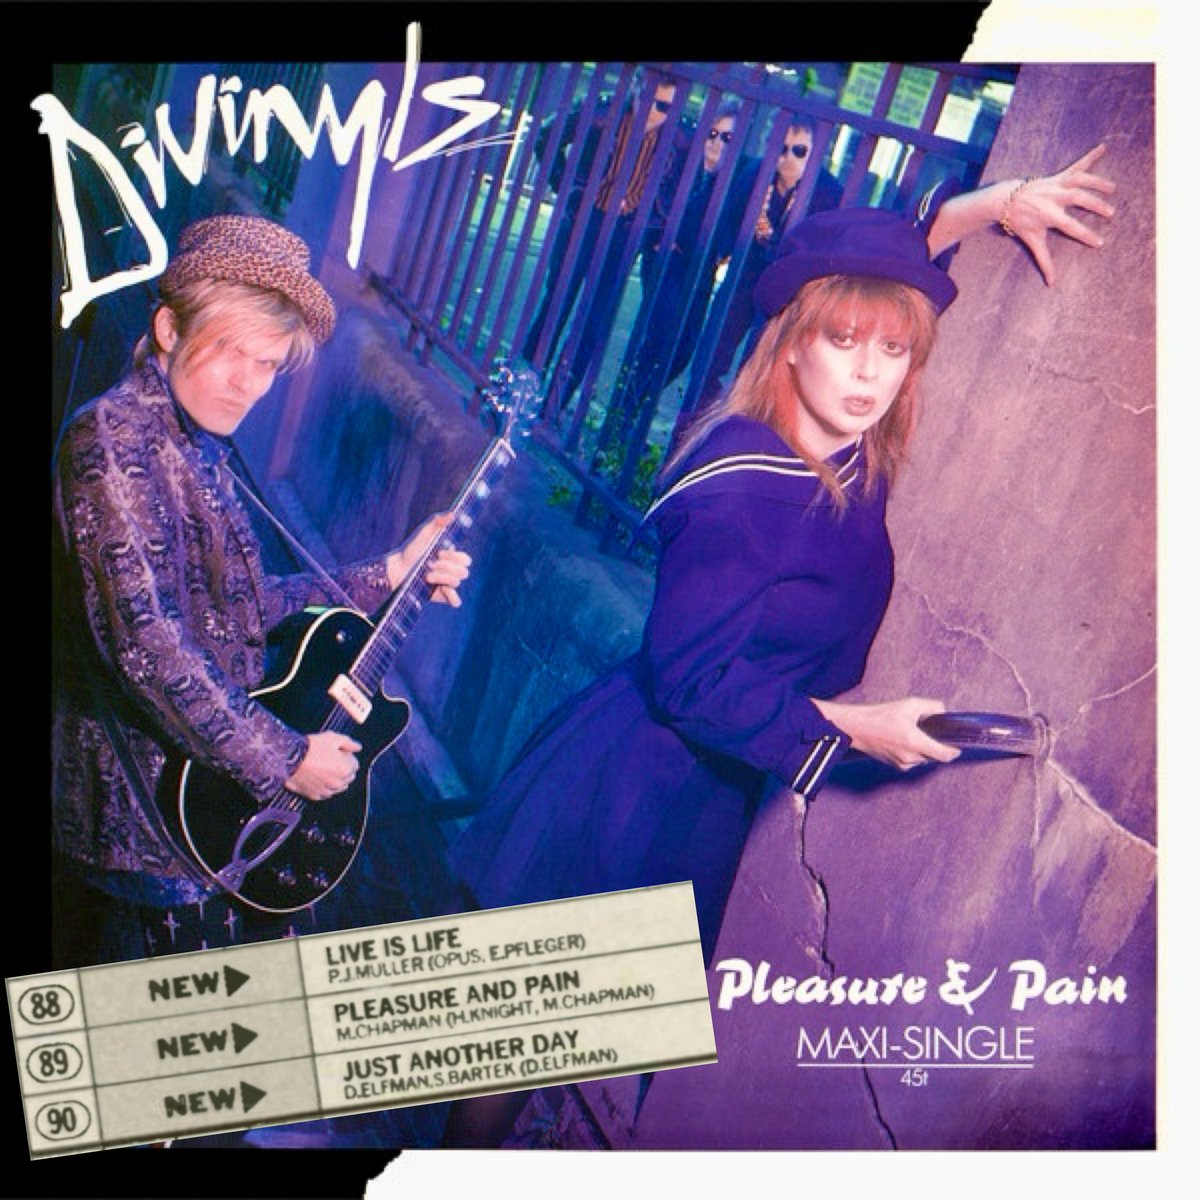 On this day in 1986 Divinyls debuted on the Billboard Hot 100 (at No. 89) with “Pleasure And Pain”, the first single off their second studio album ‘What A Life!’ #Divinyls #PleasureAndPain #OnThisDayInMusic #AussieRock #The80s #chrissyamphlett #markmcentee #billboardhot100